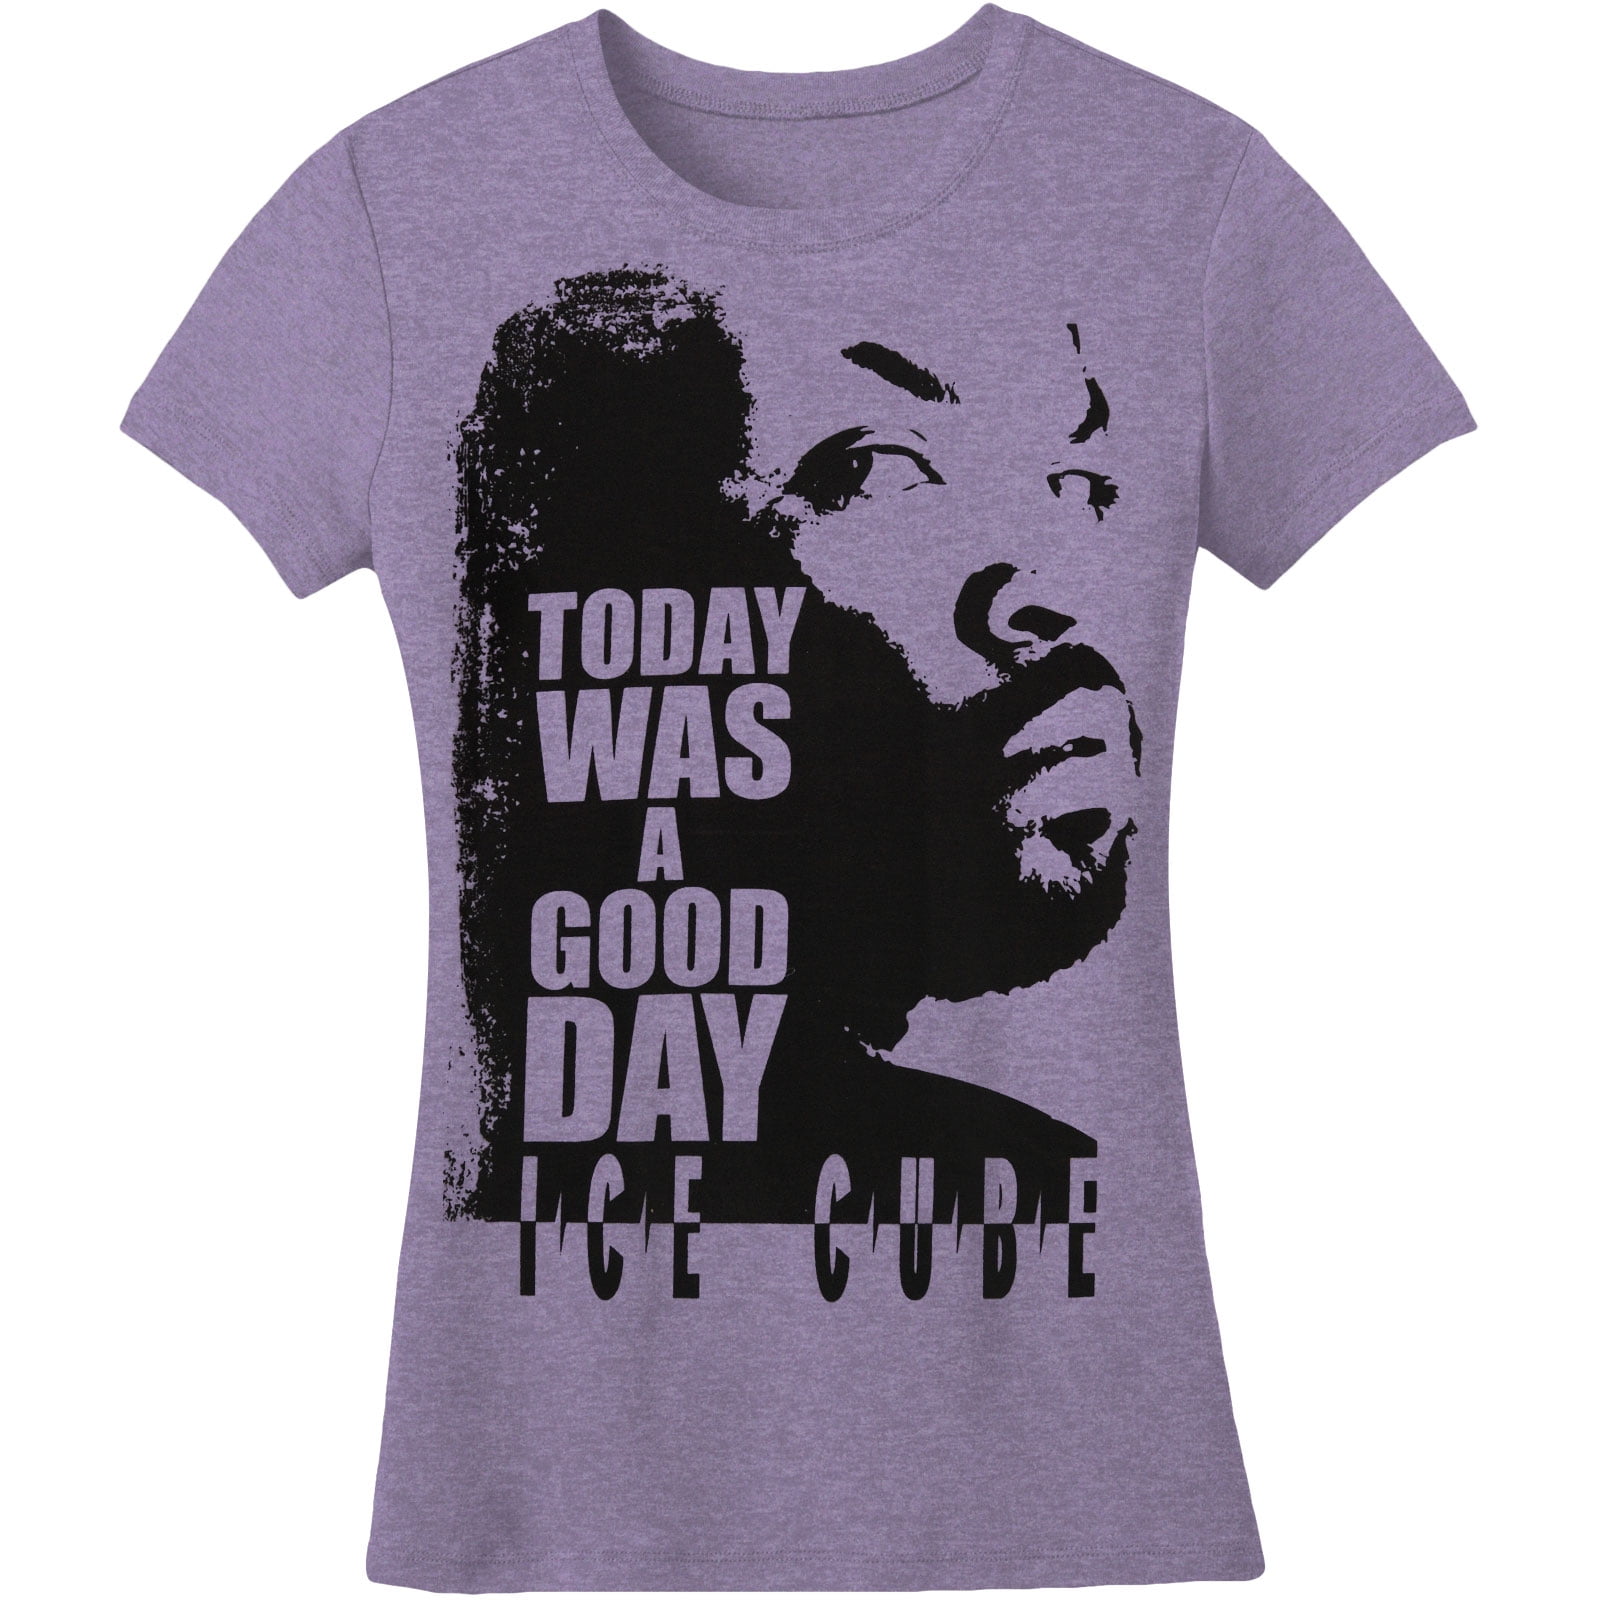 Mini Today Was A Good Day Ice Cube Tee - Black